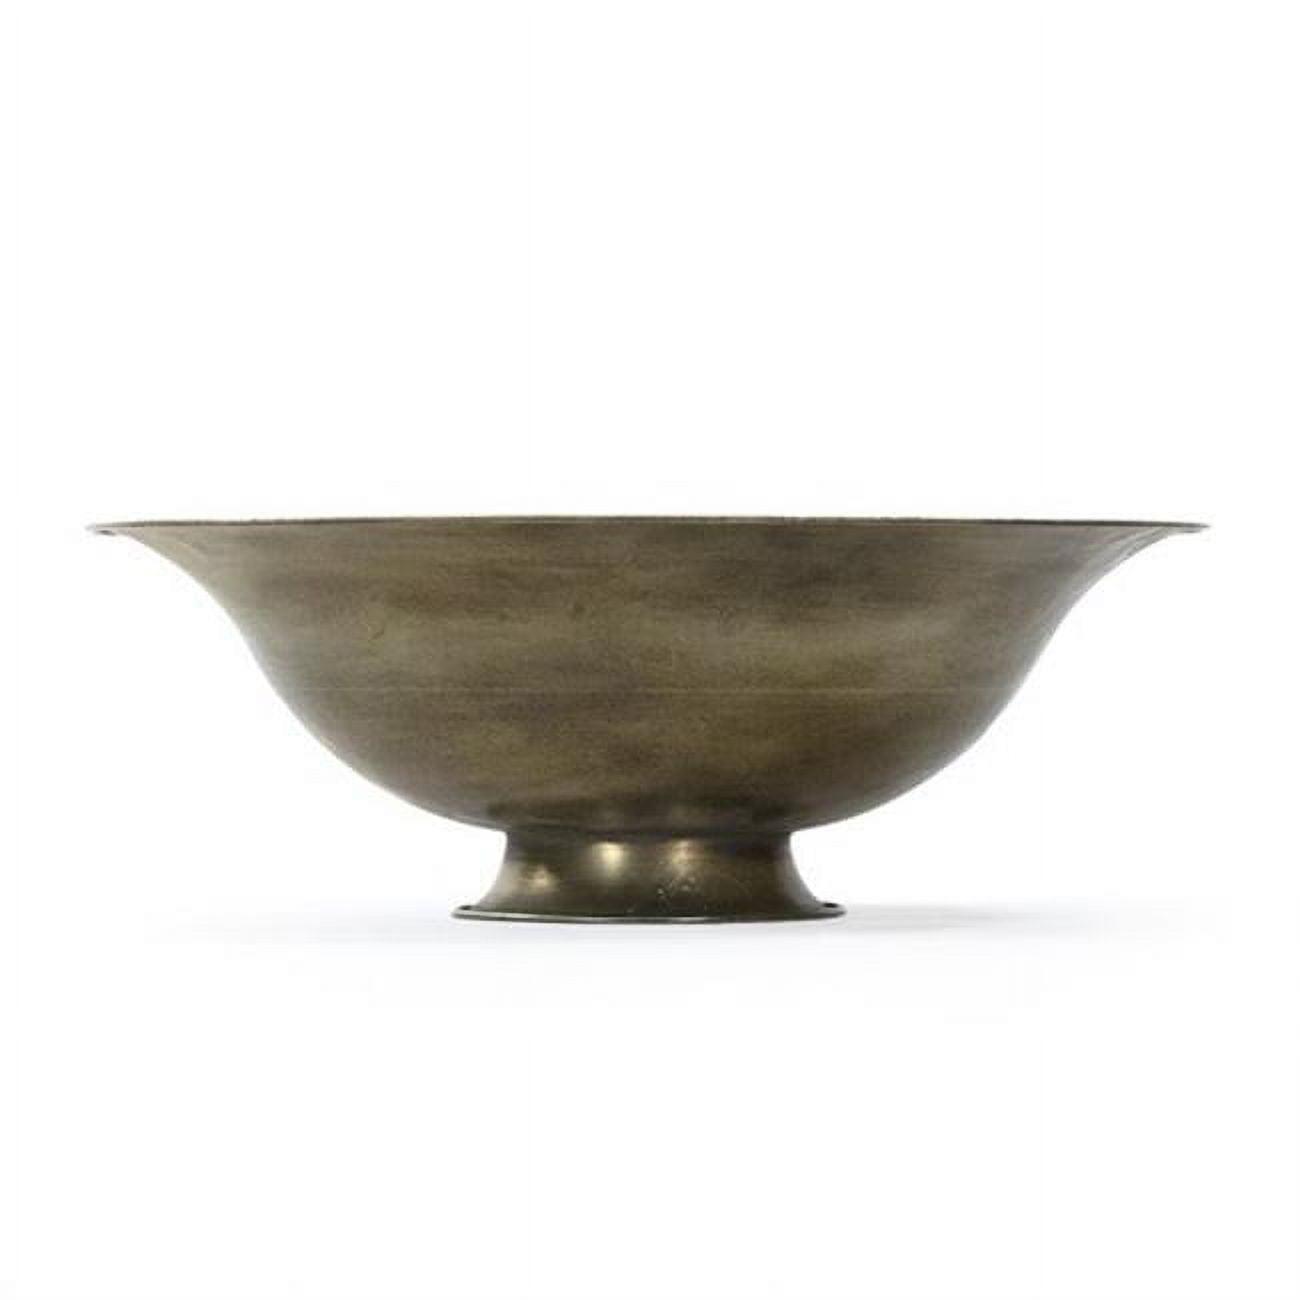 Antique Gold Handcrafted Metal Bowl with Stand, 15.25"x7"